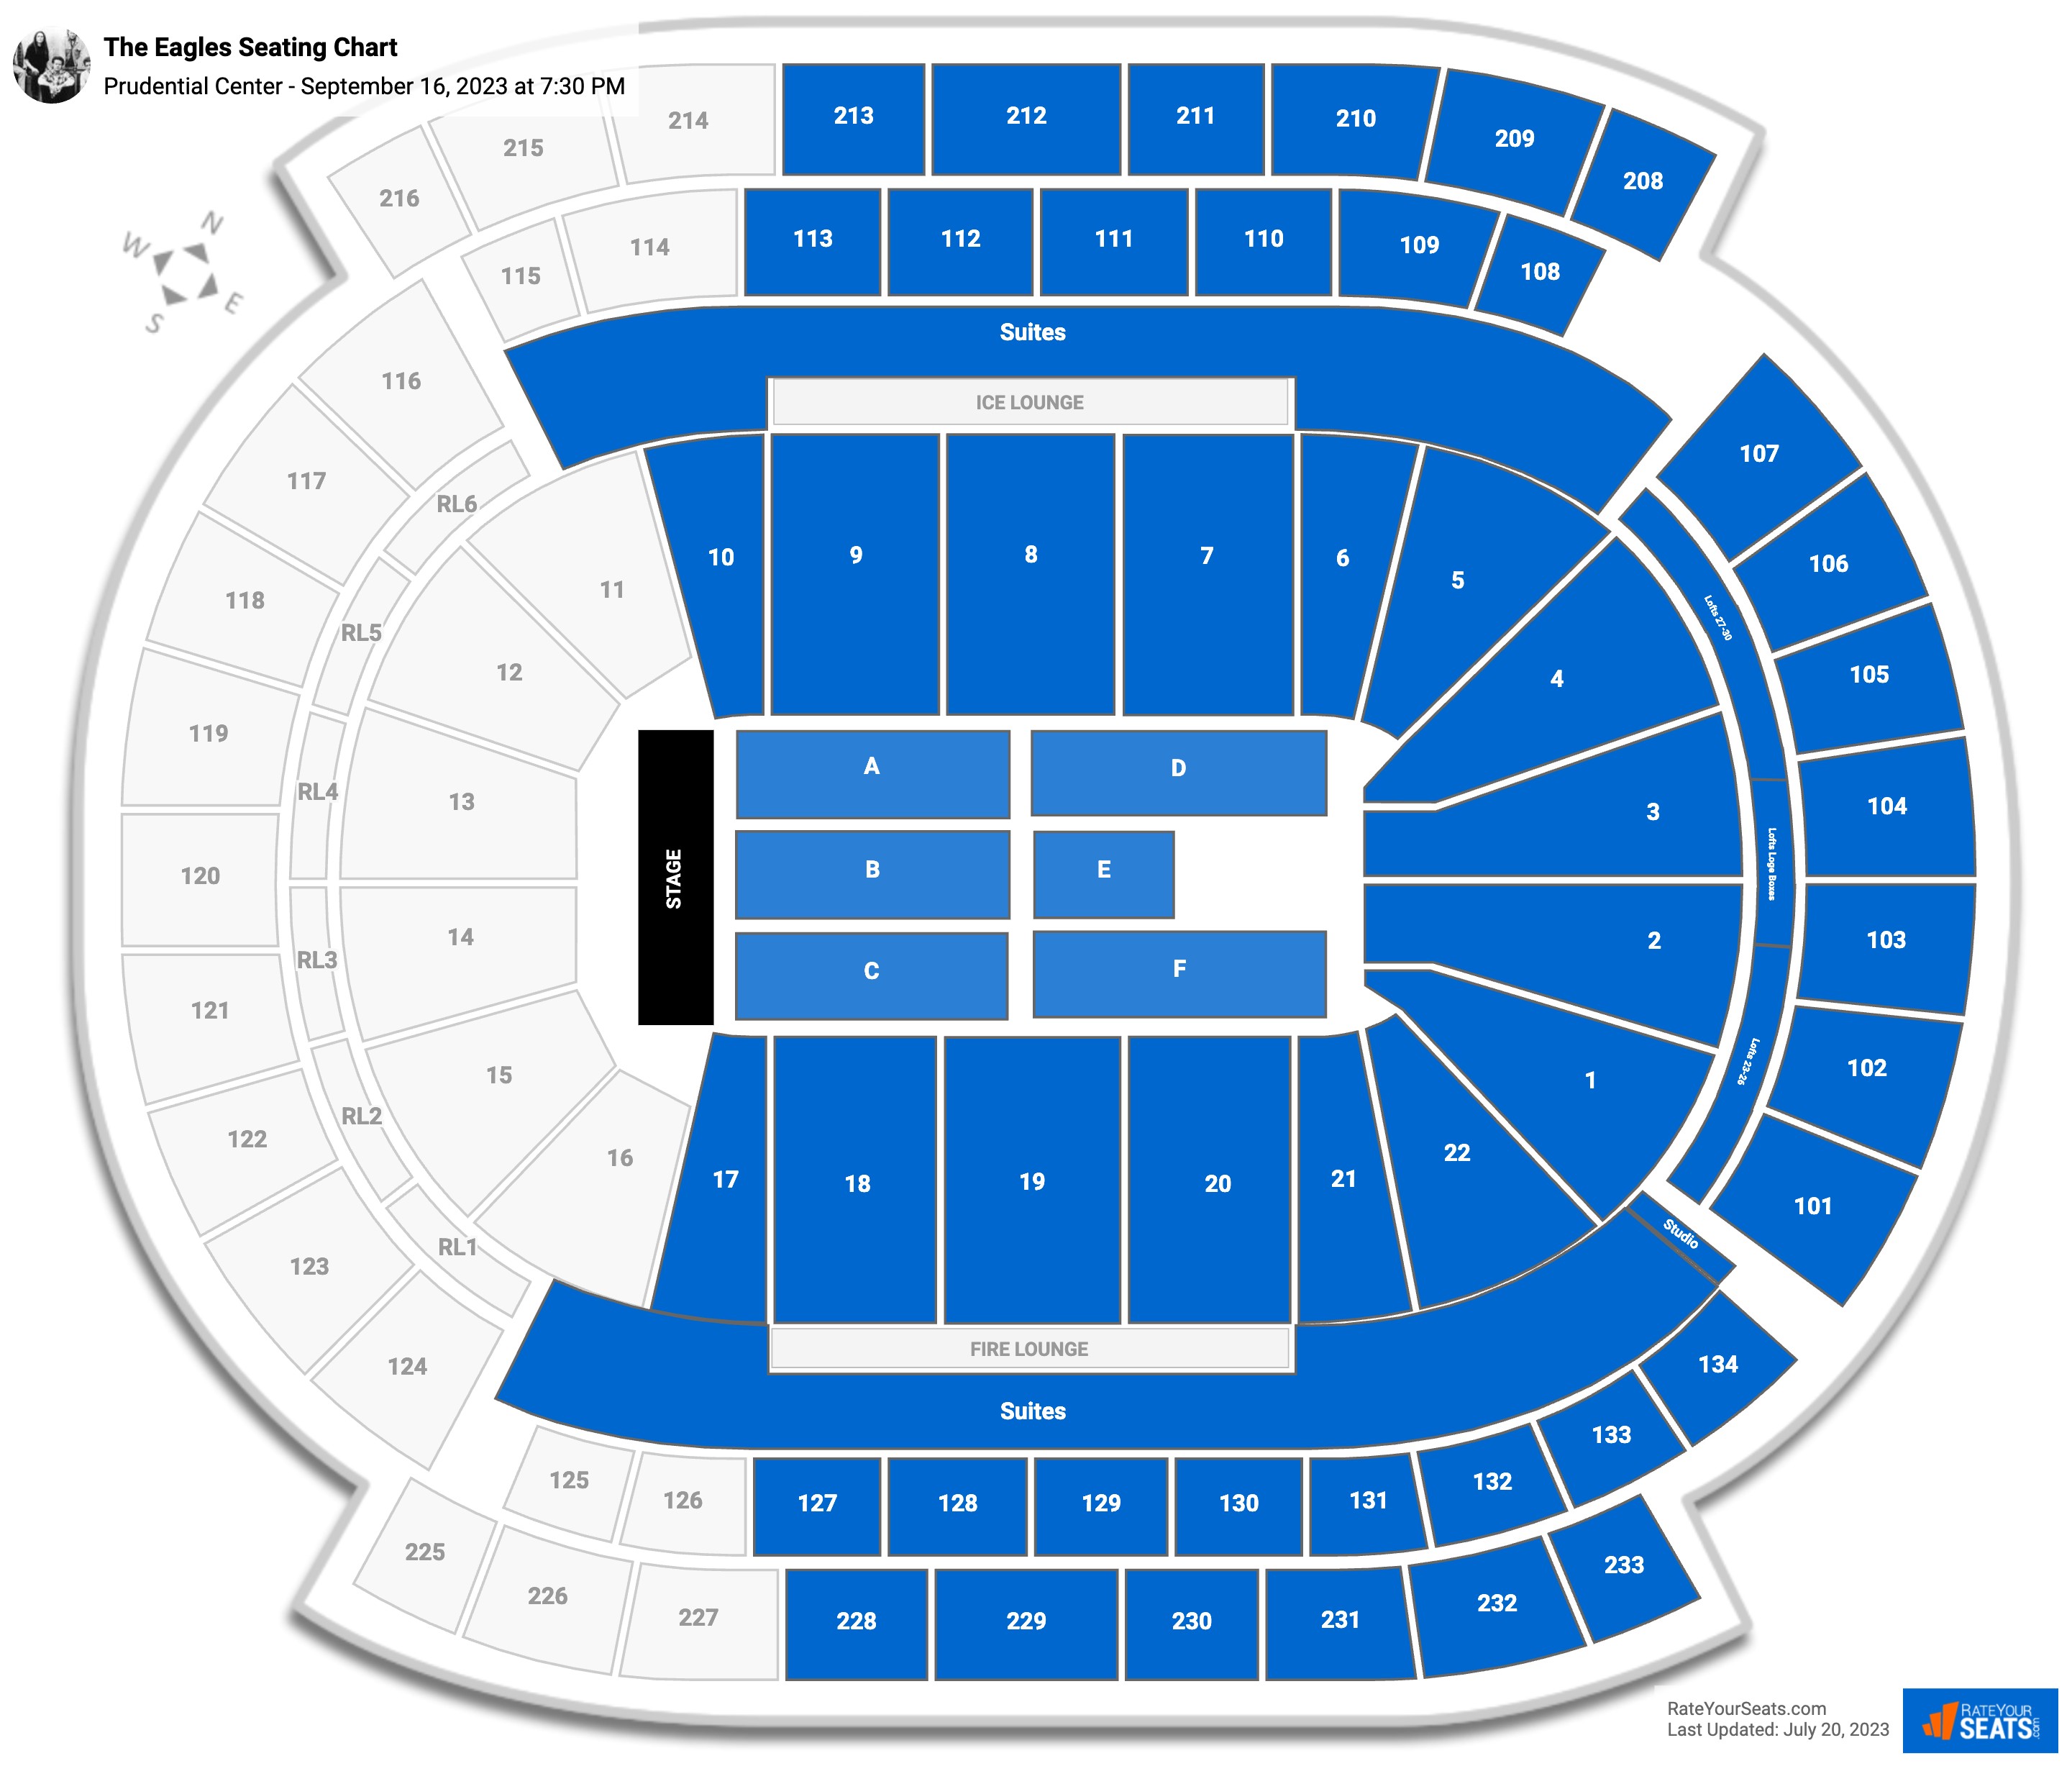 Prudential Center Concert Seating Chart